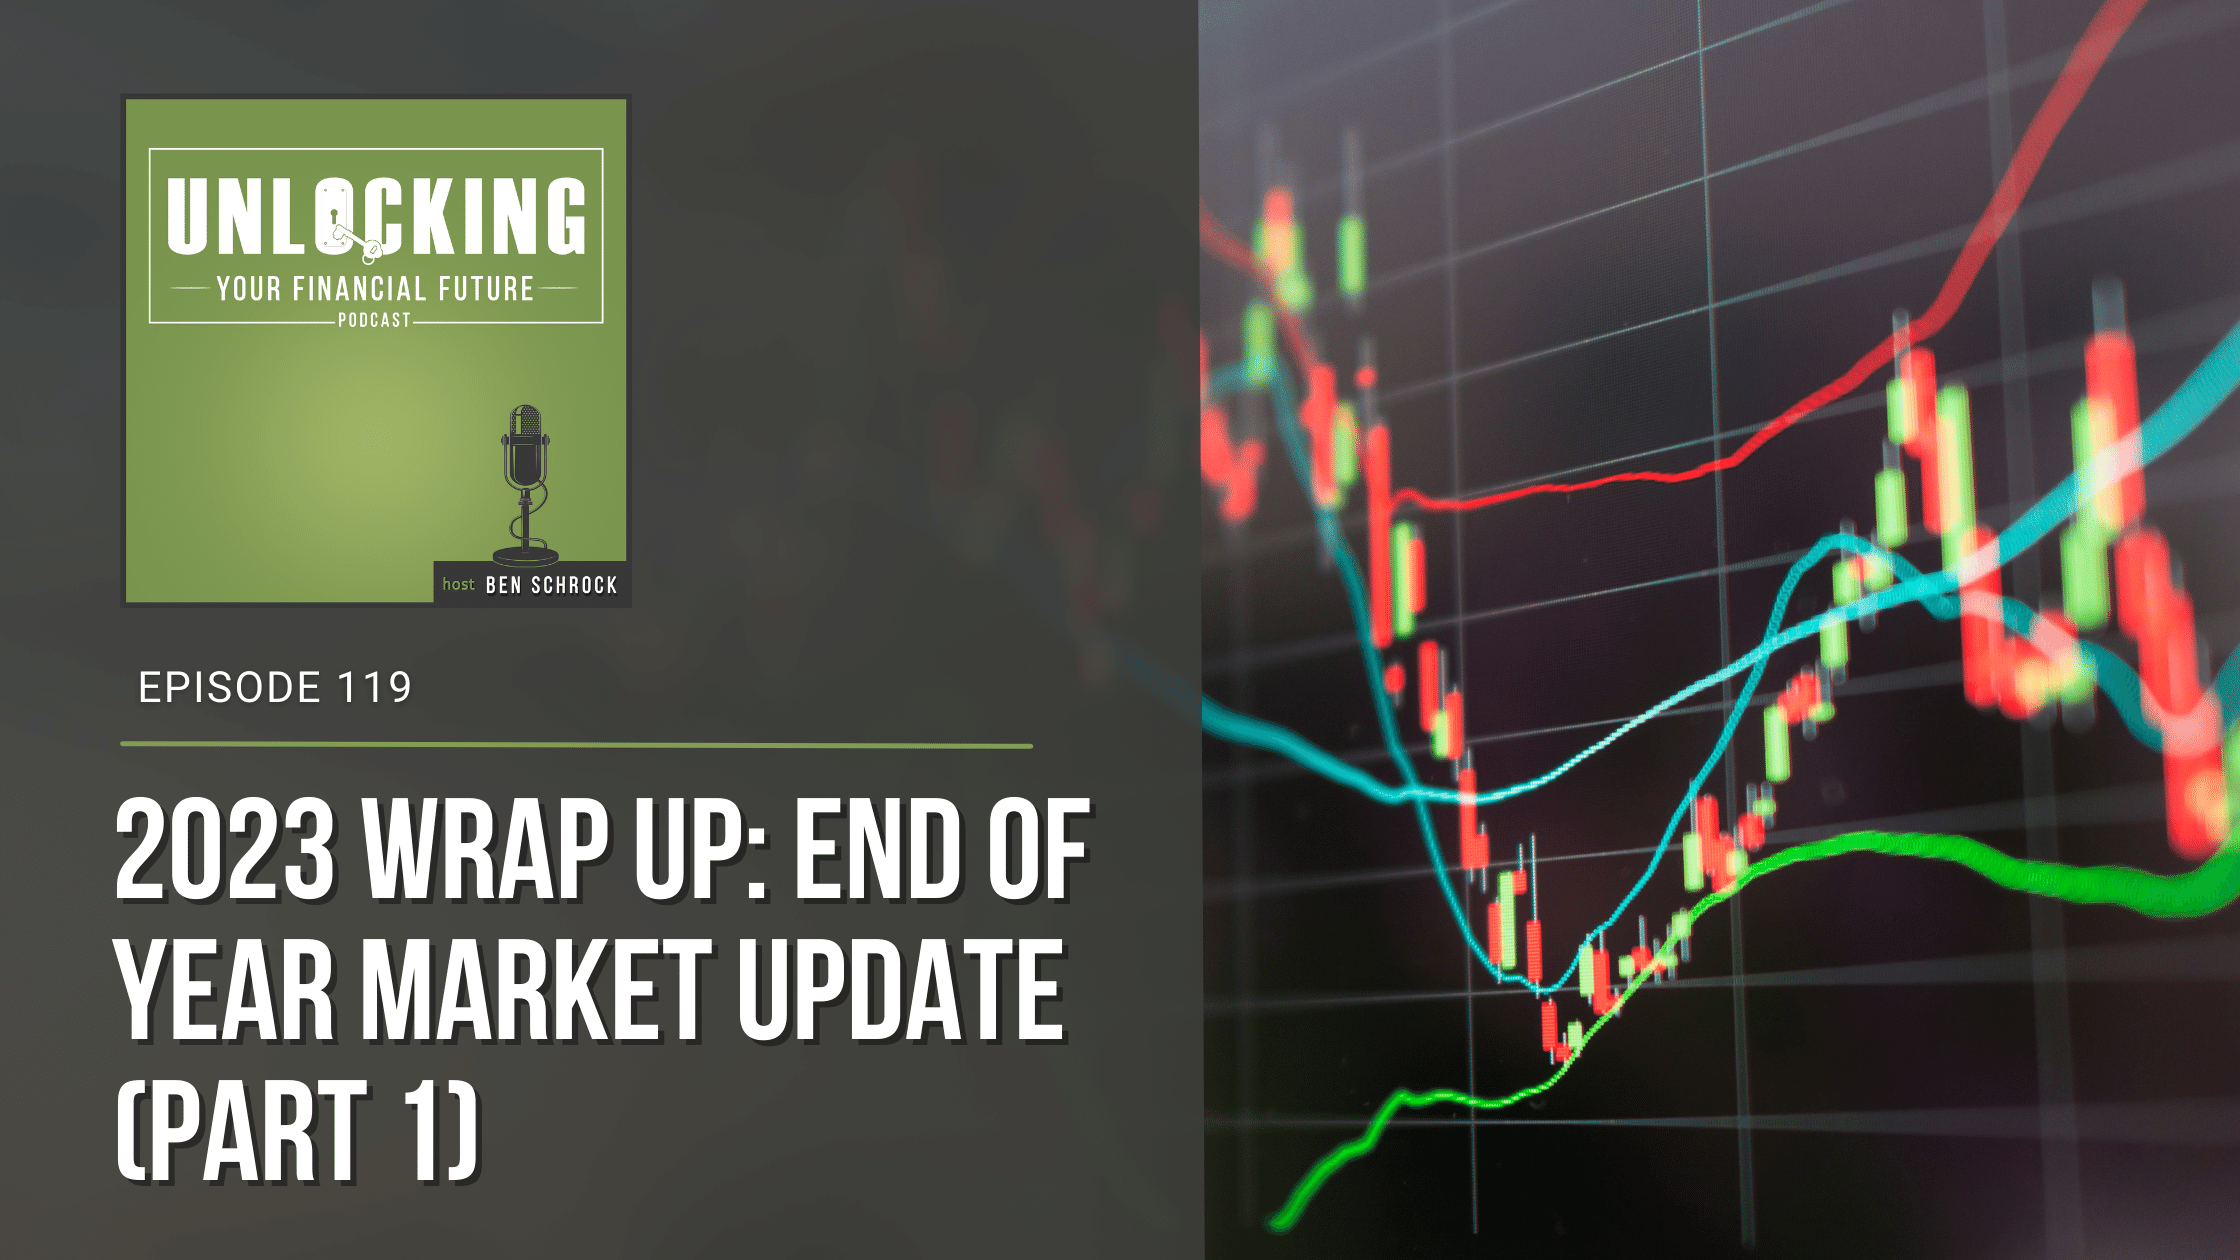 End of Year Market Update